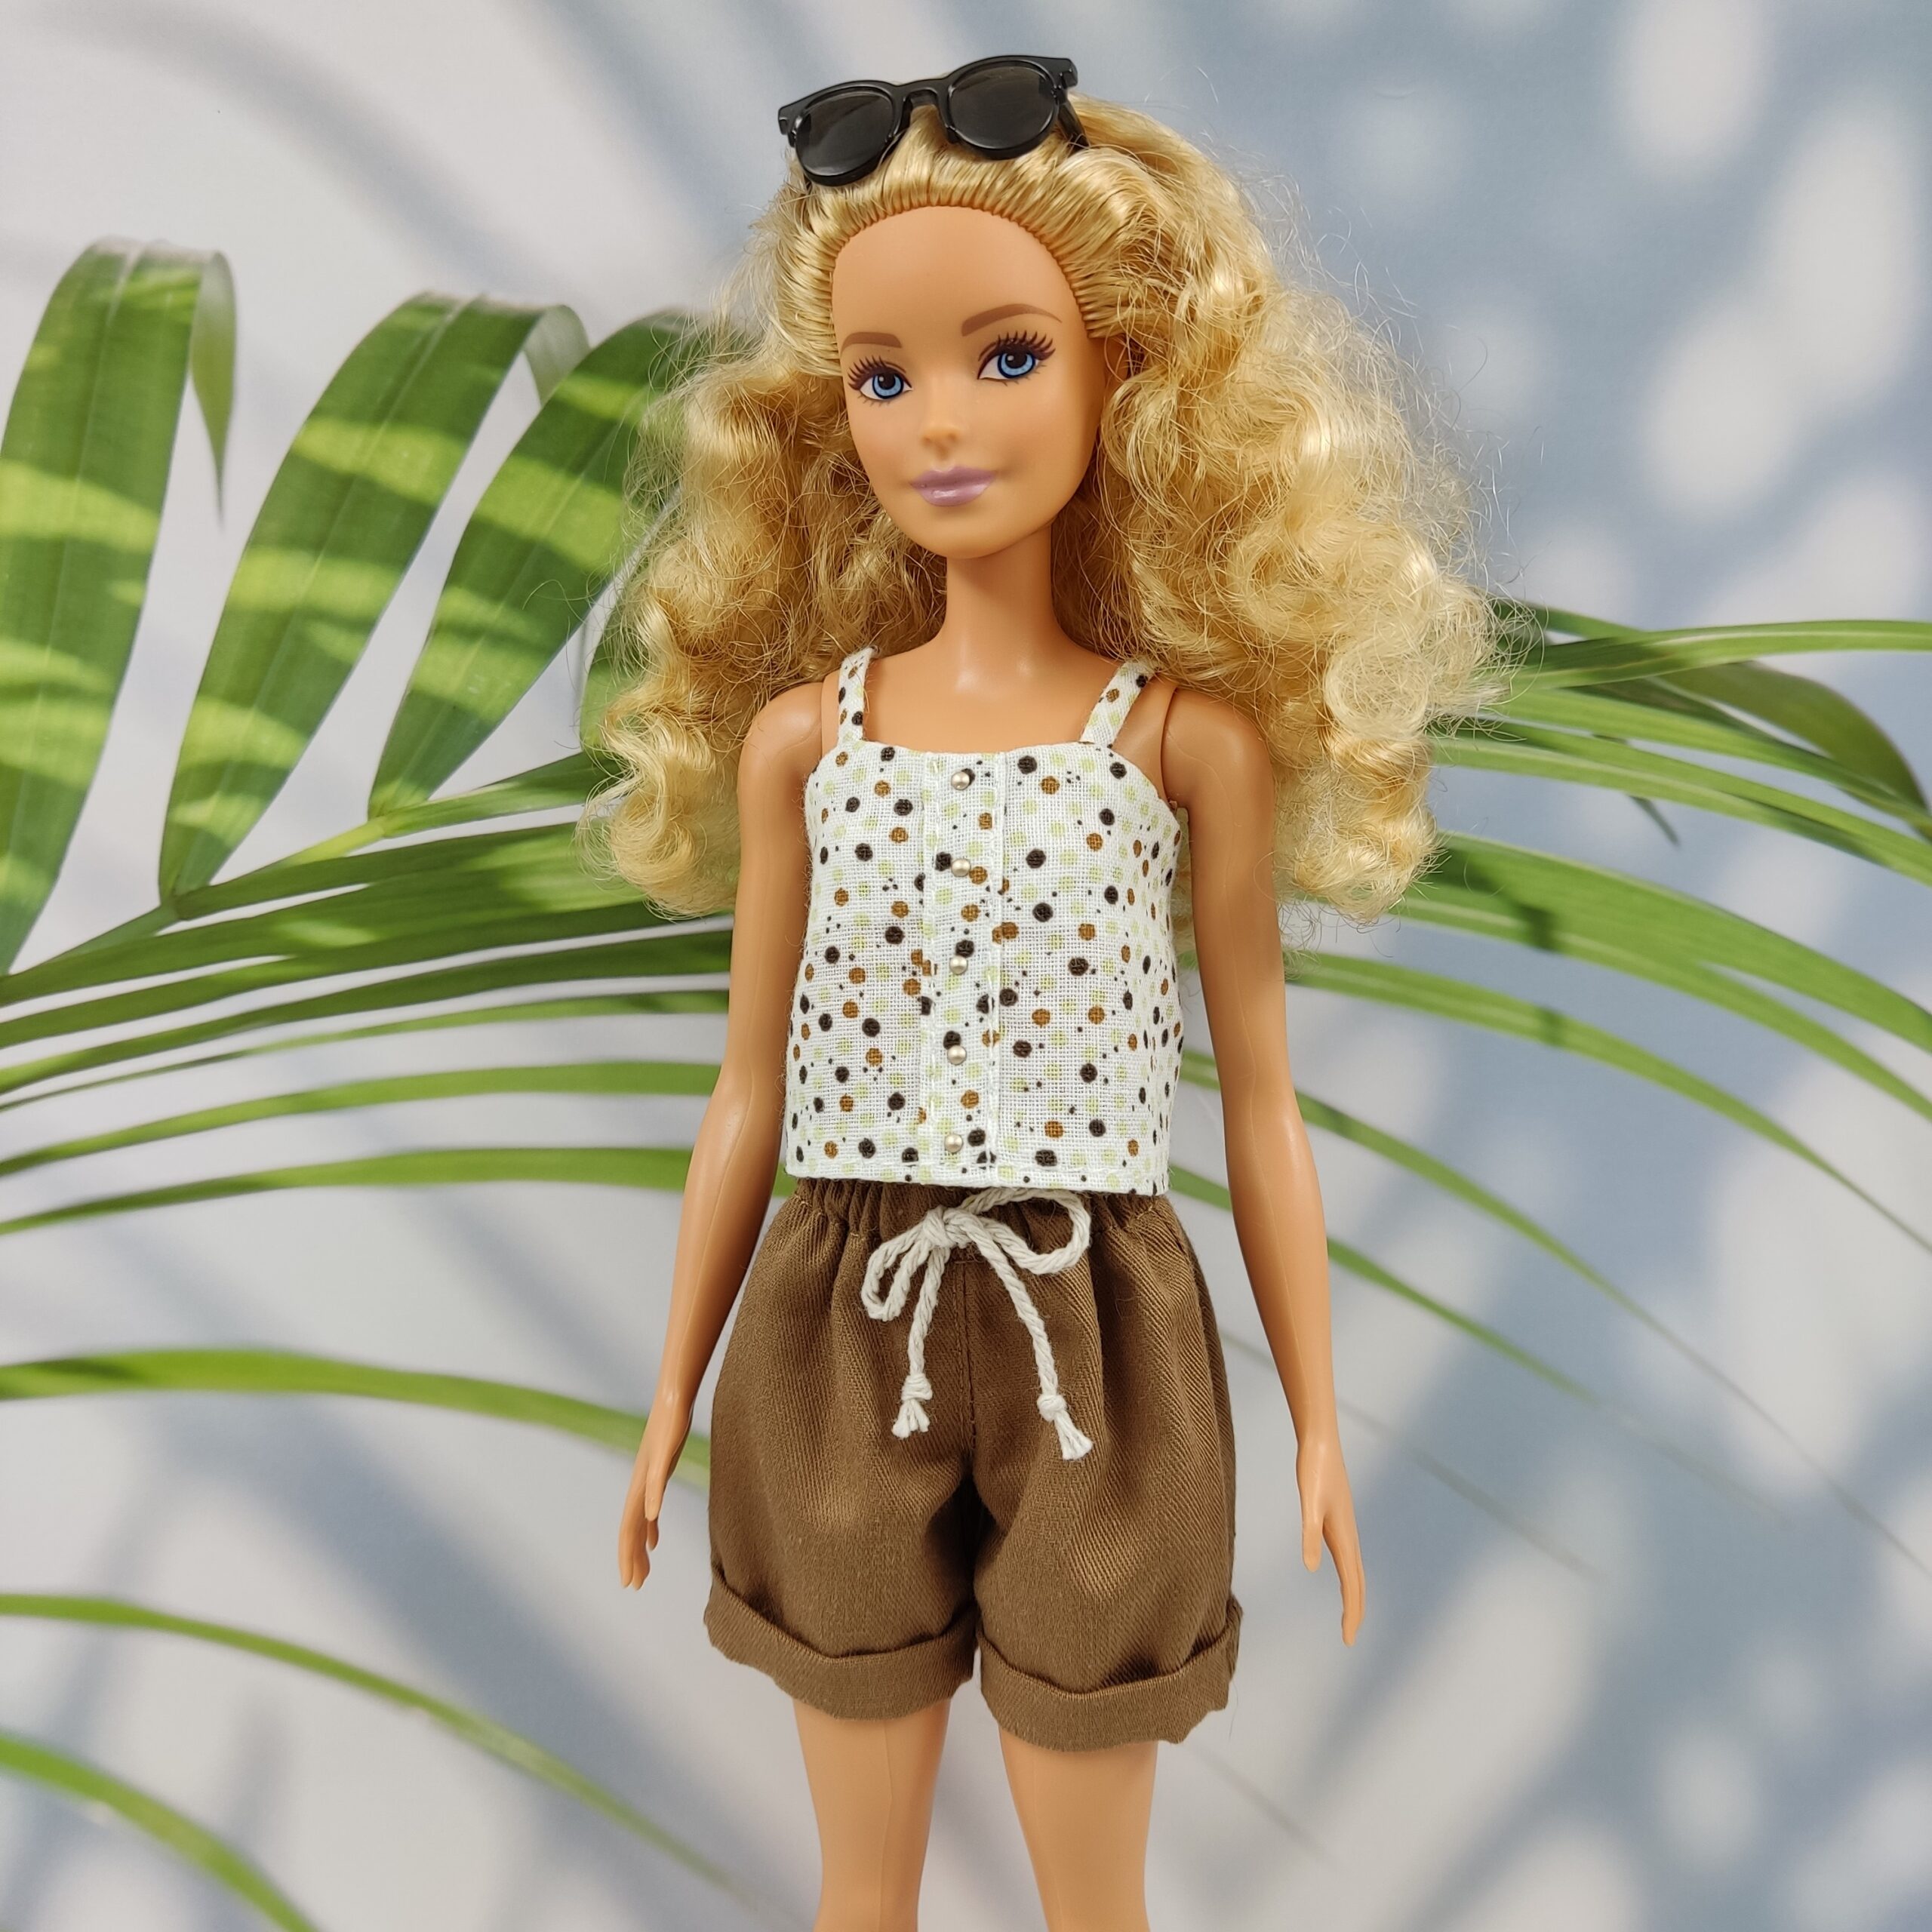 Barbie doll clothes by VikukuShop | Top for Barbie doll